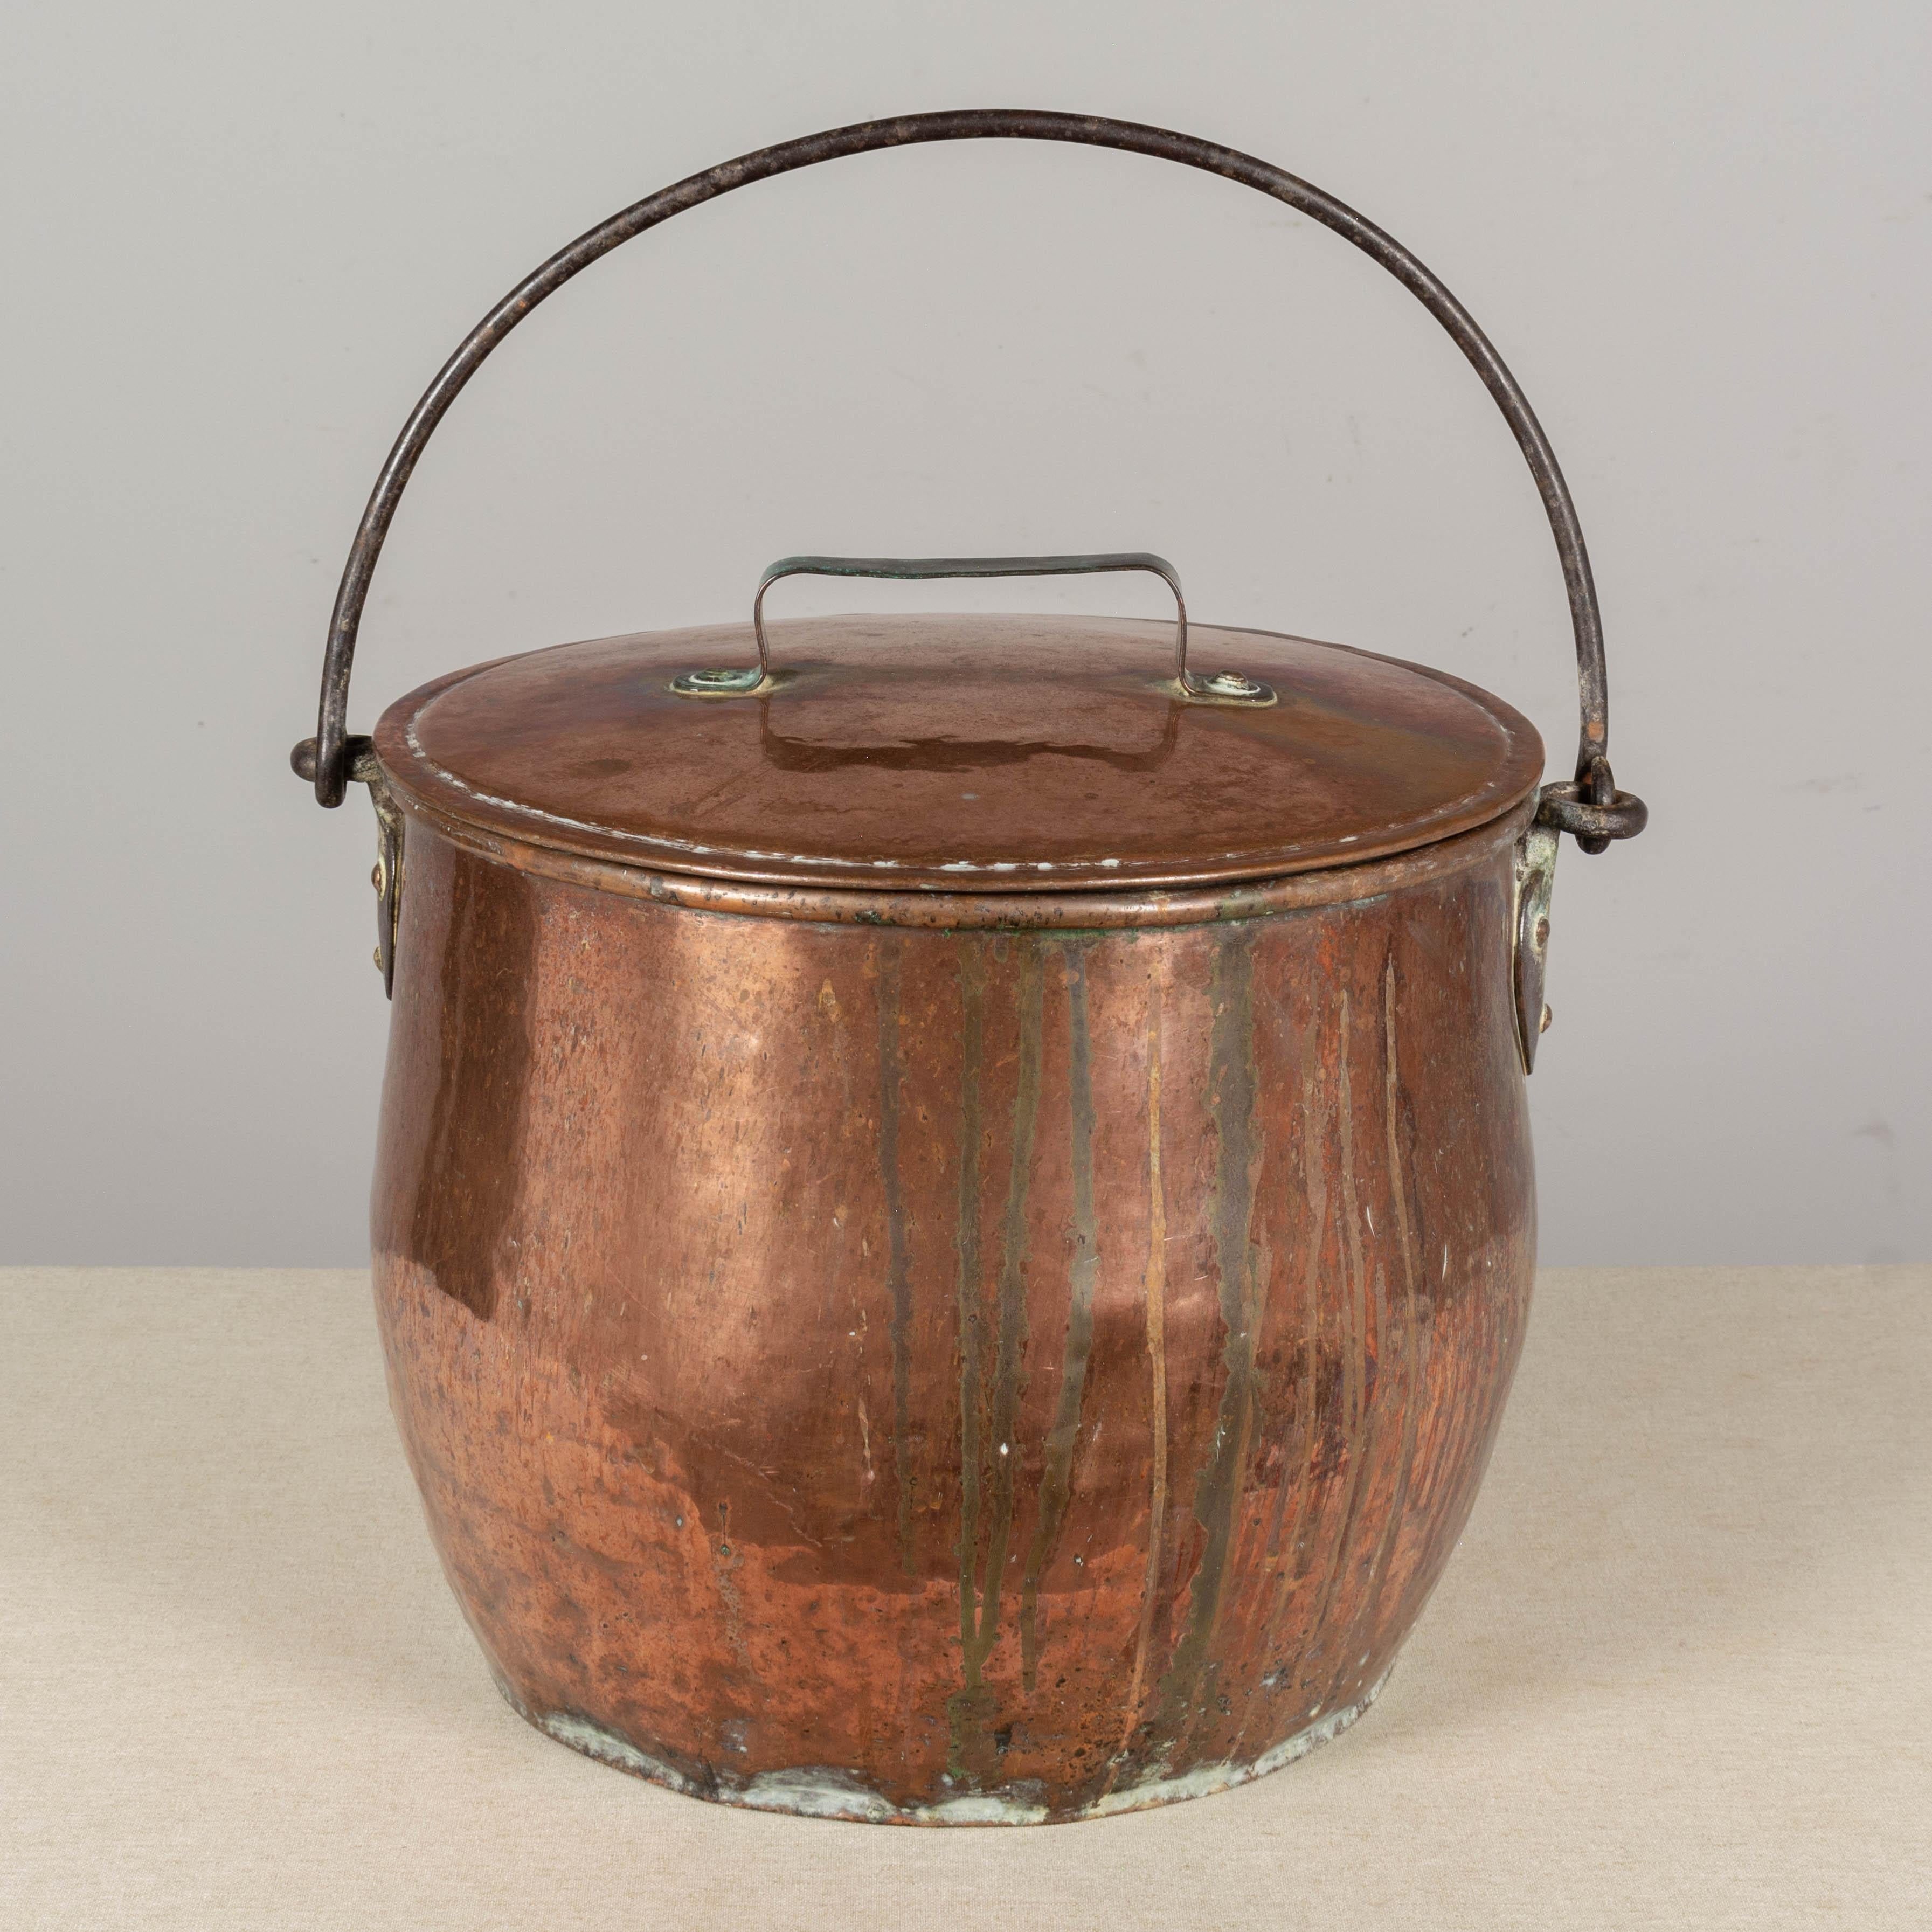 Rustic Large 19th Century Copper Stock Pot or Cauldron For Sale